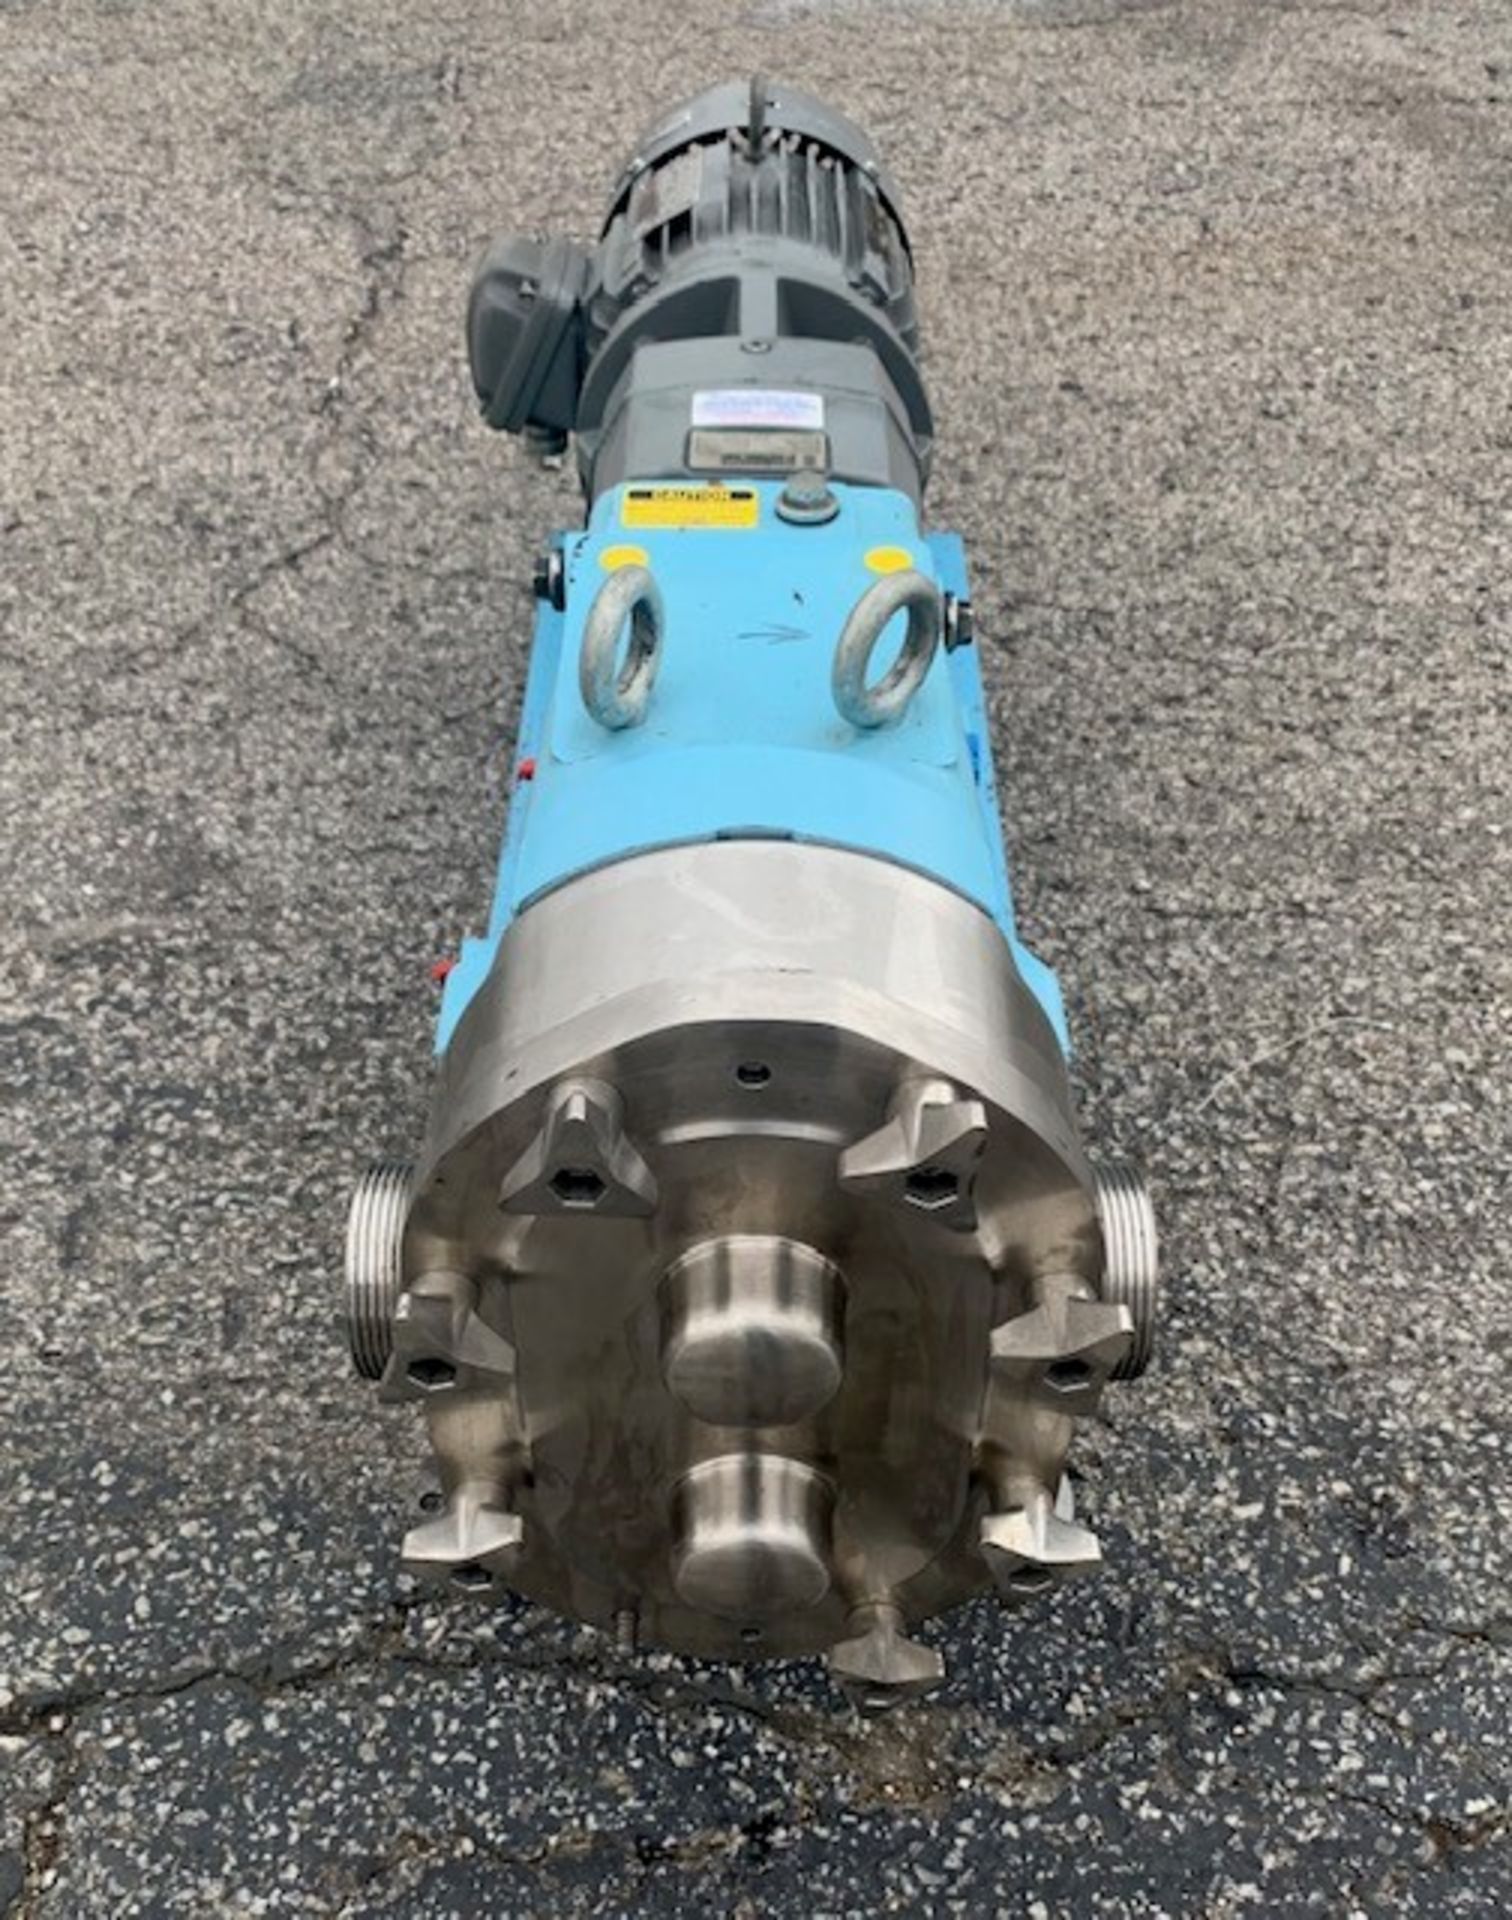 Waukesha 060 Positive Displacement Pump with Sterling Gear Reduction, Powered by 3 hp Motor, - Image 3 of 7